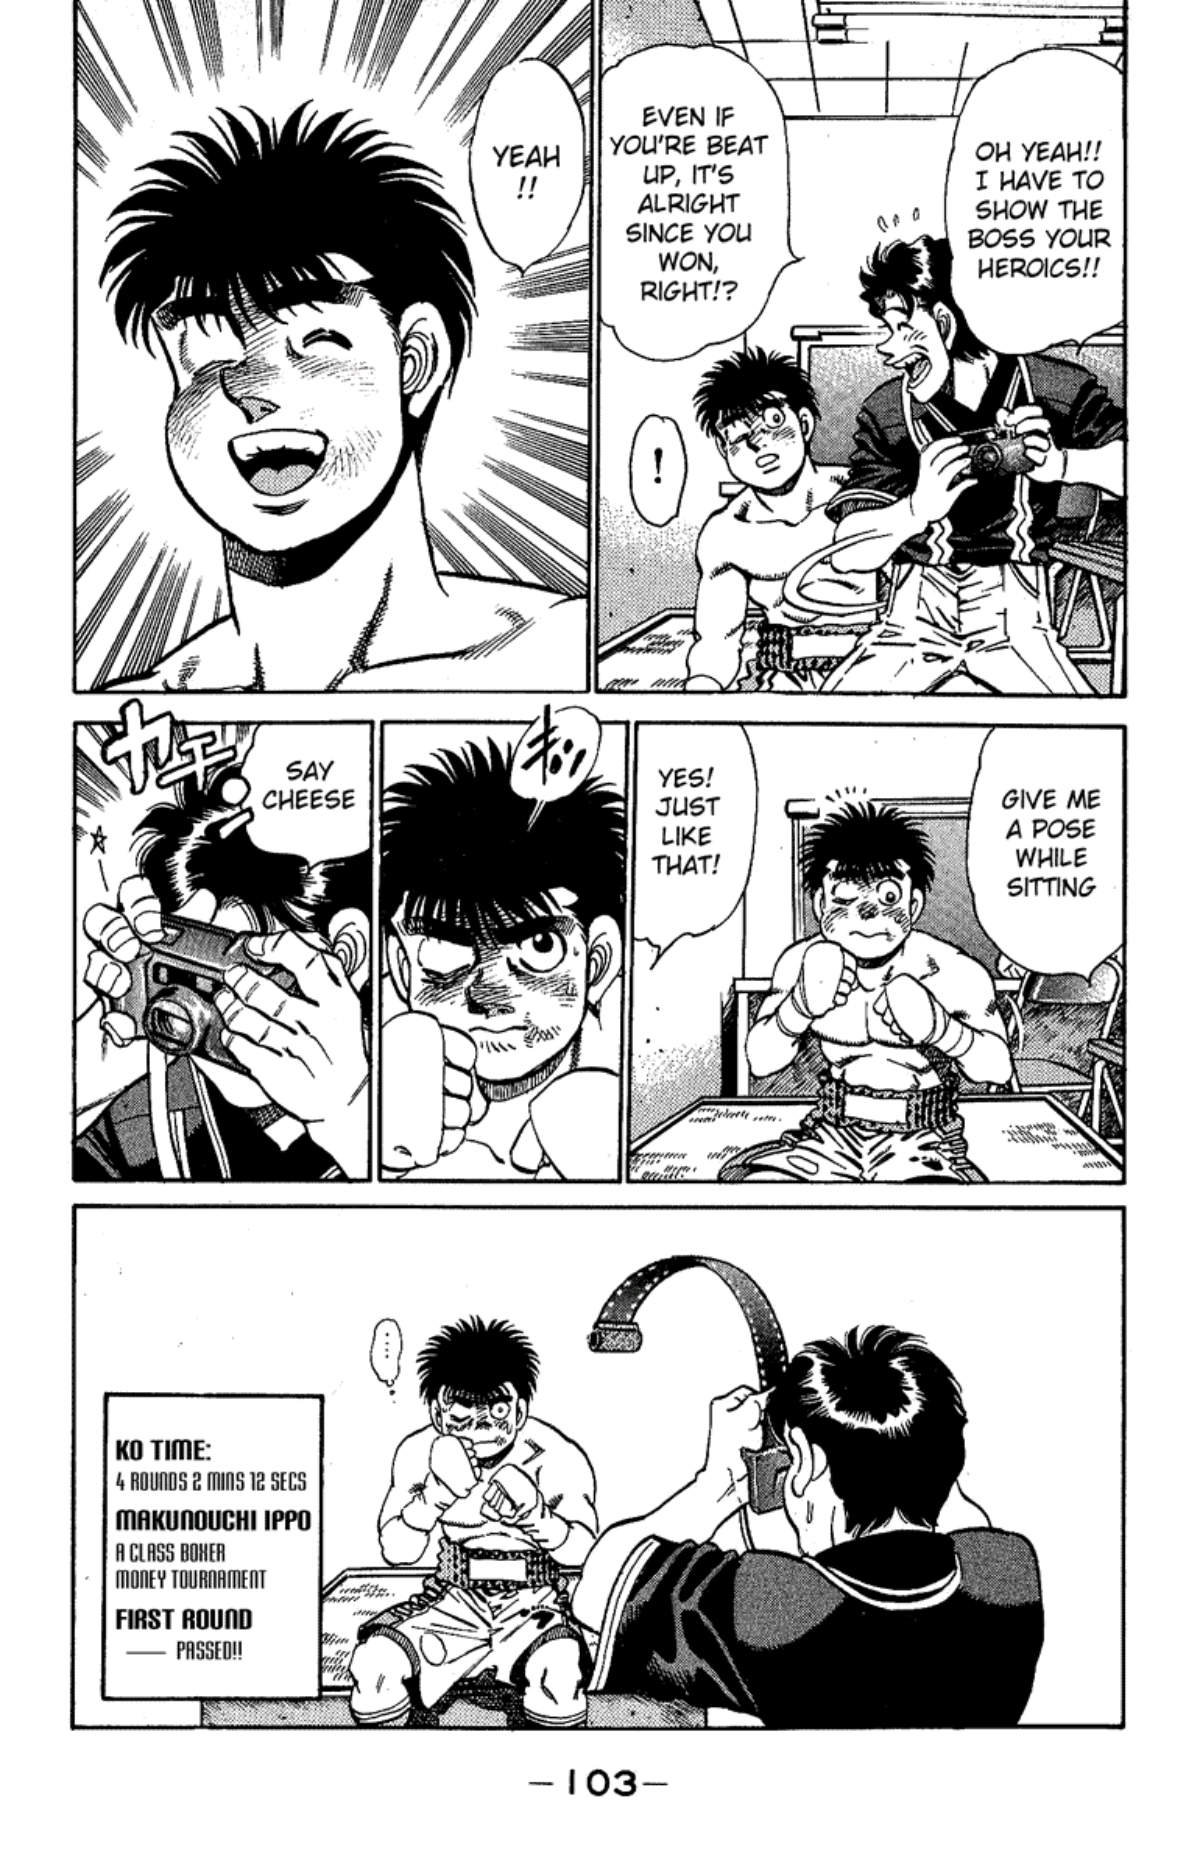 Ippo attempts to strike a fighting pose for his friend to take a photo of, but the film pops out of the camera when he tries to shoot. Ippo's record is 9 fights, 9 wins. 